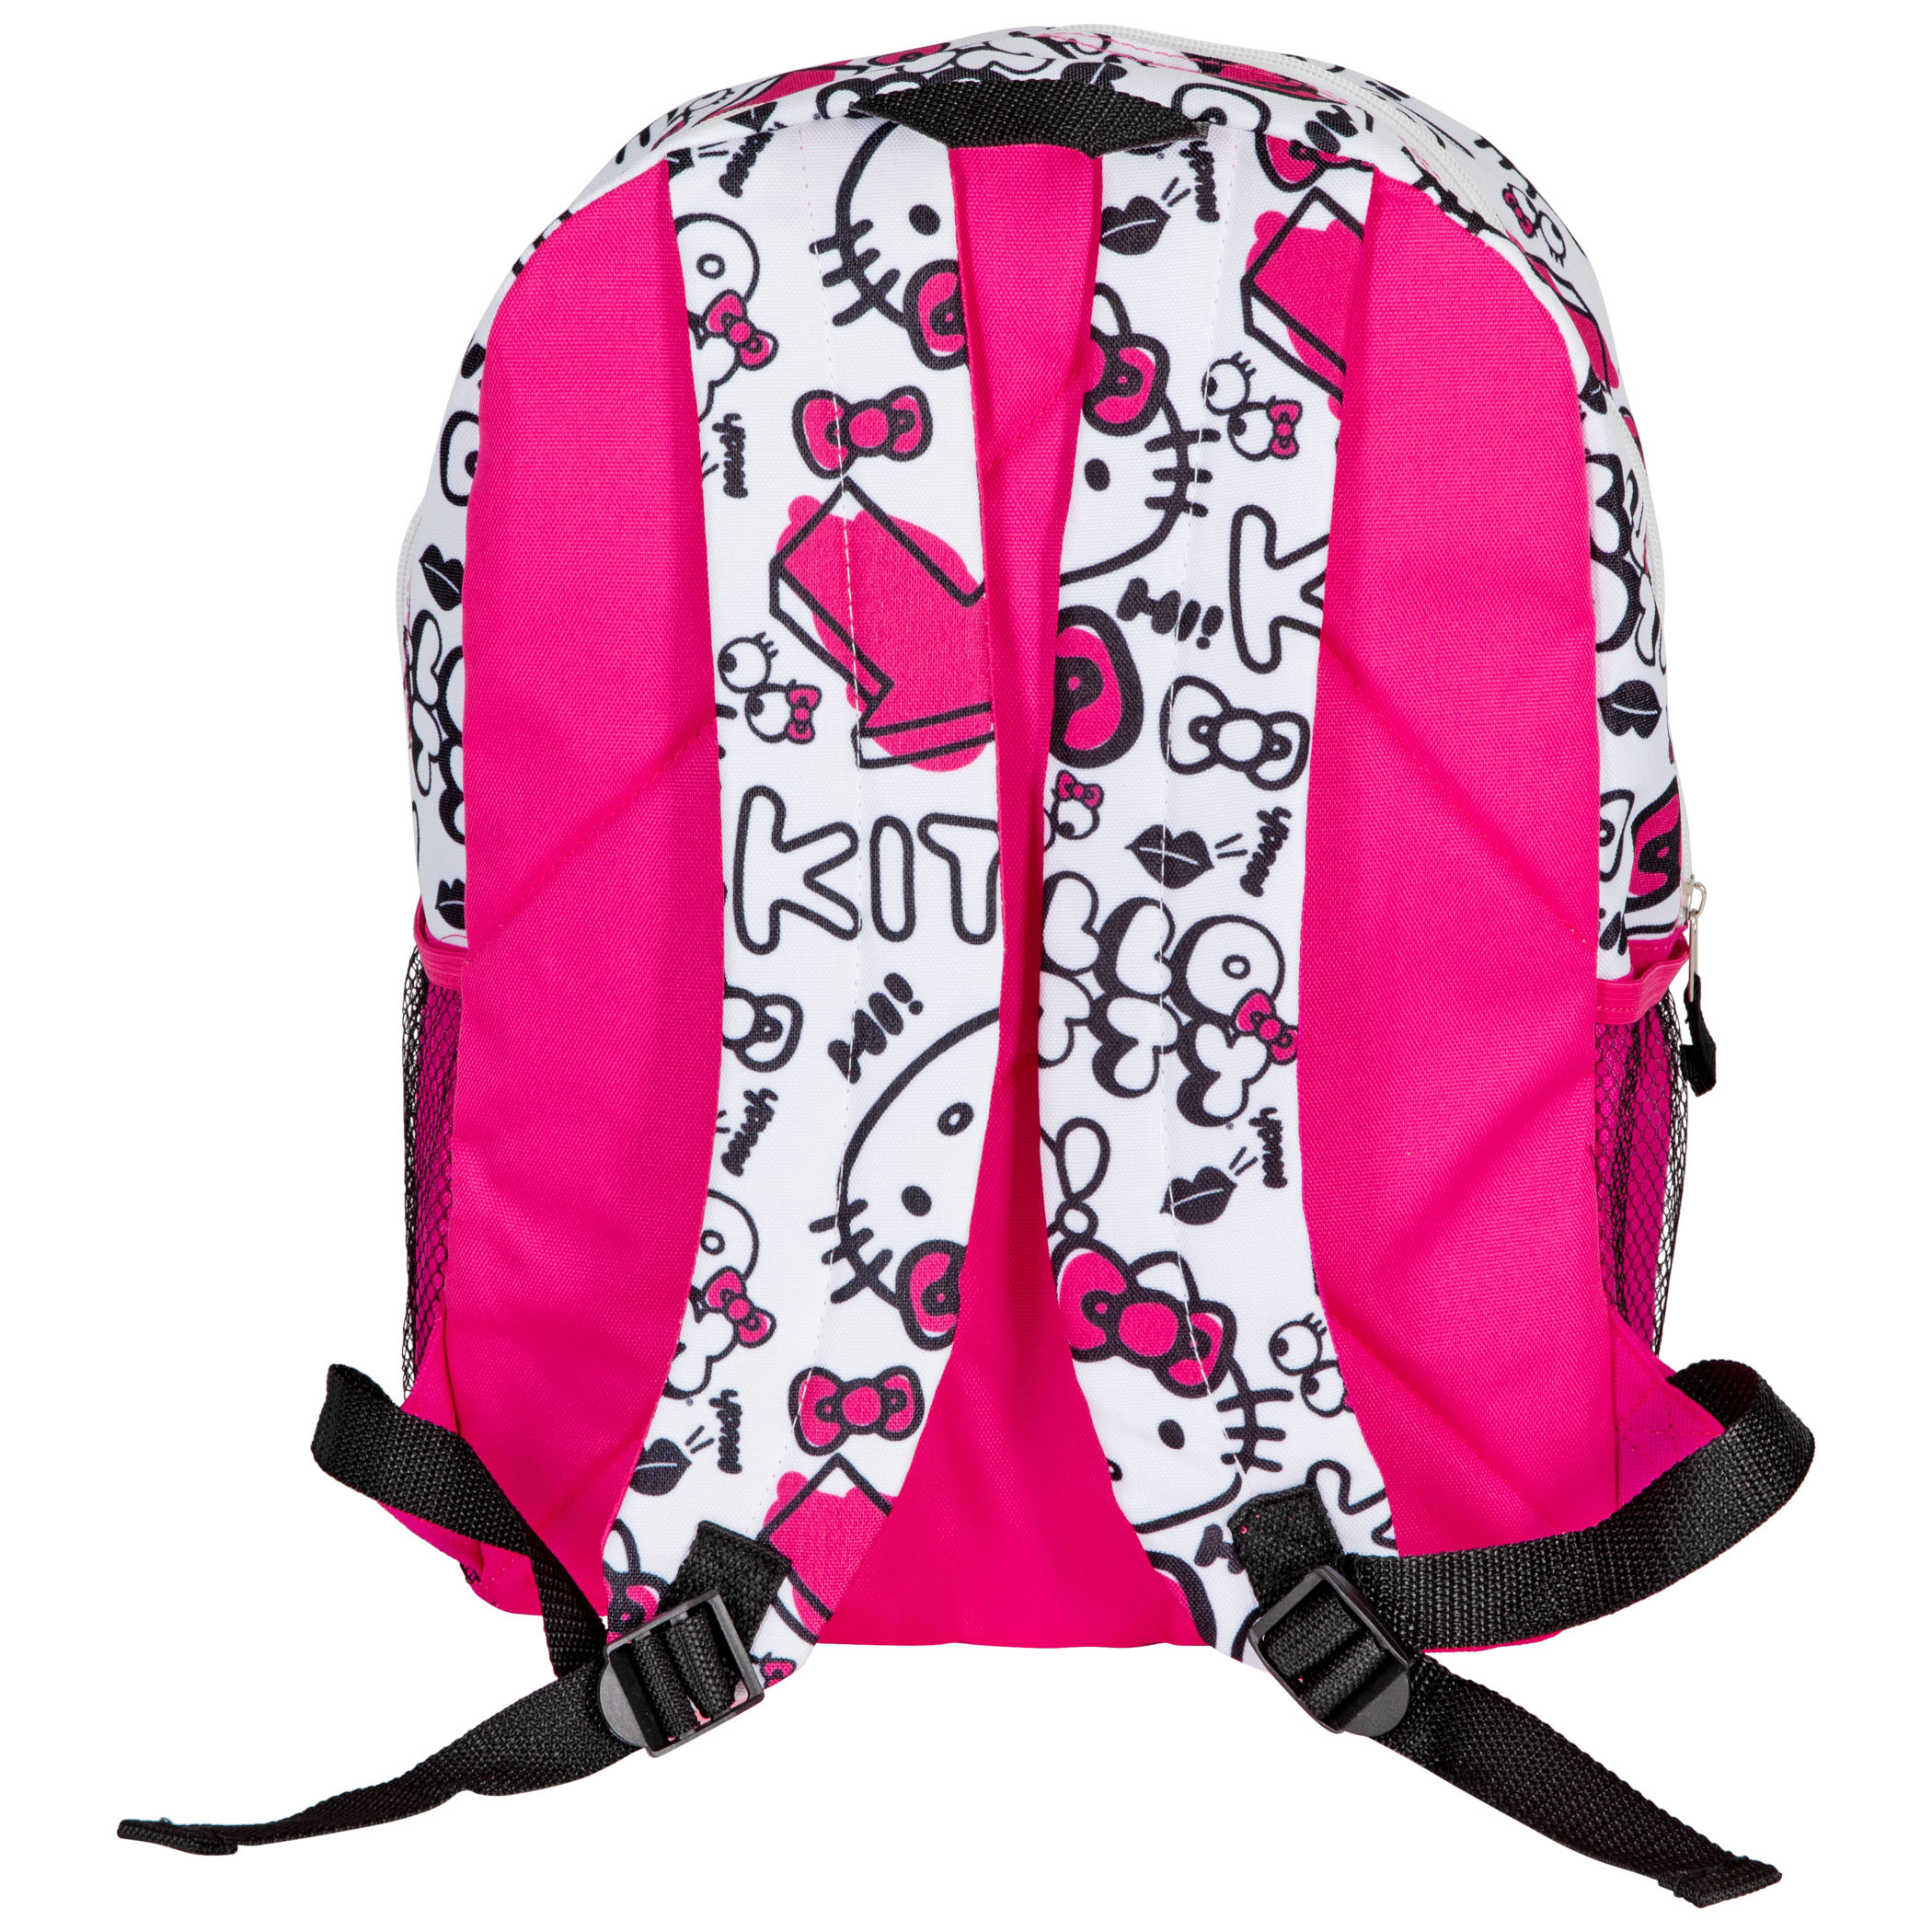 Shop Hello Kitty Backpack College Book Bags T – Luggage Factory